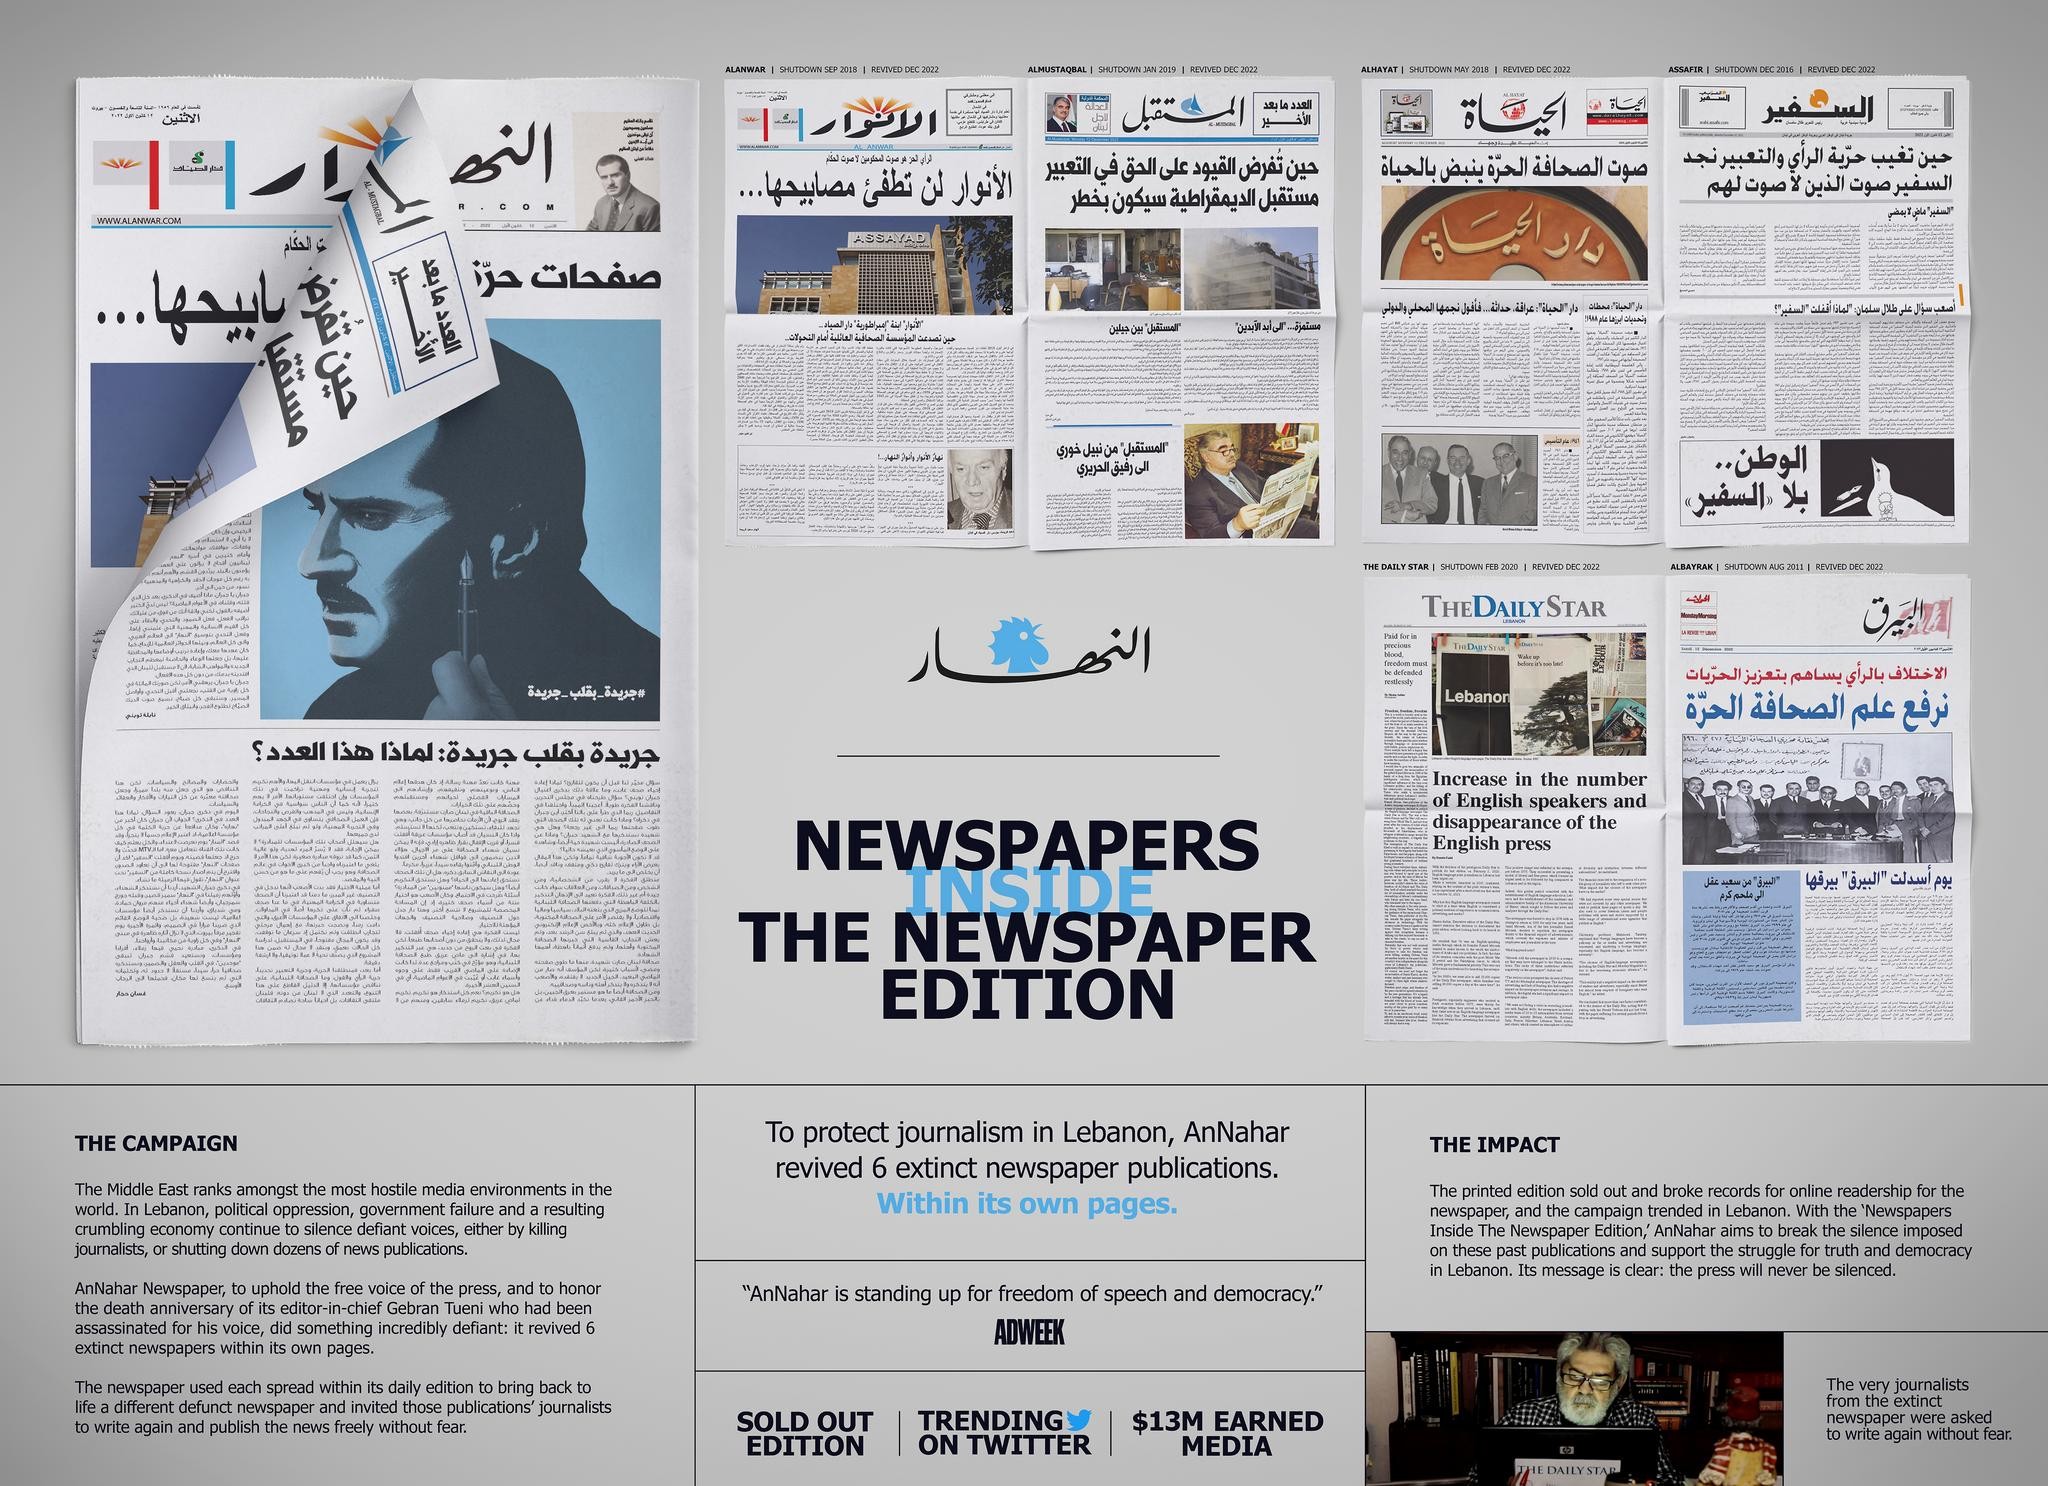 THE NEWSPAPERS INSIDE THE NEWSPAPER EDITION